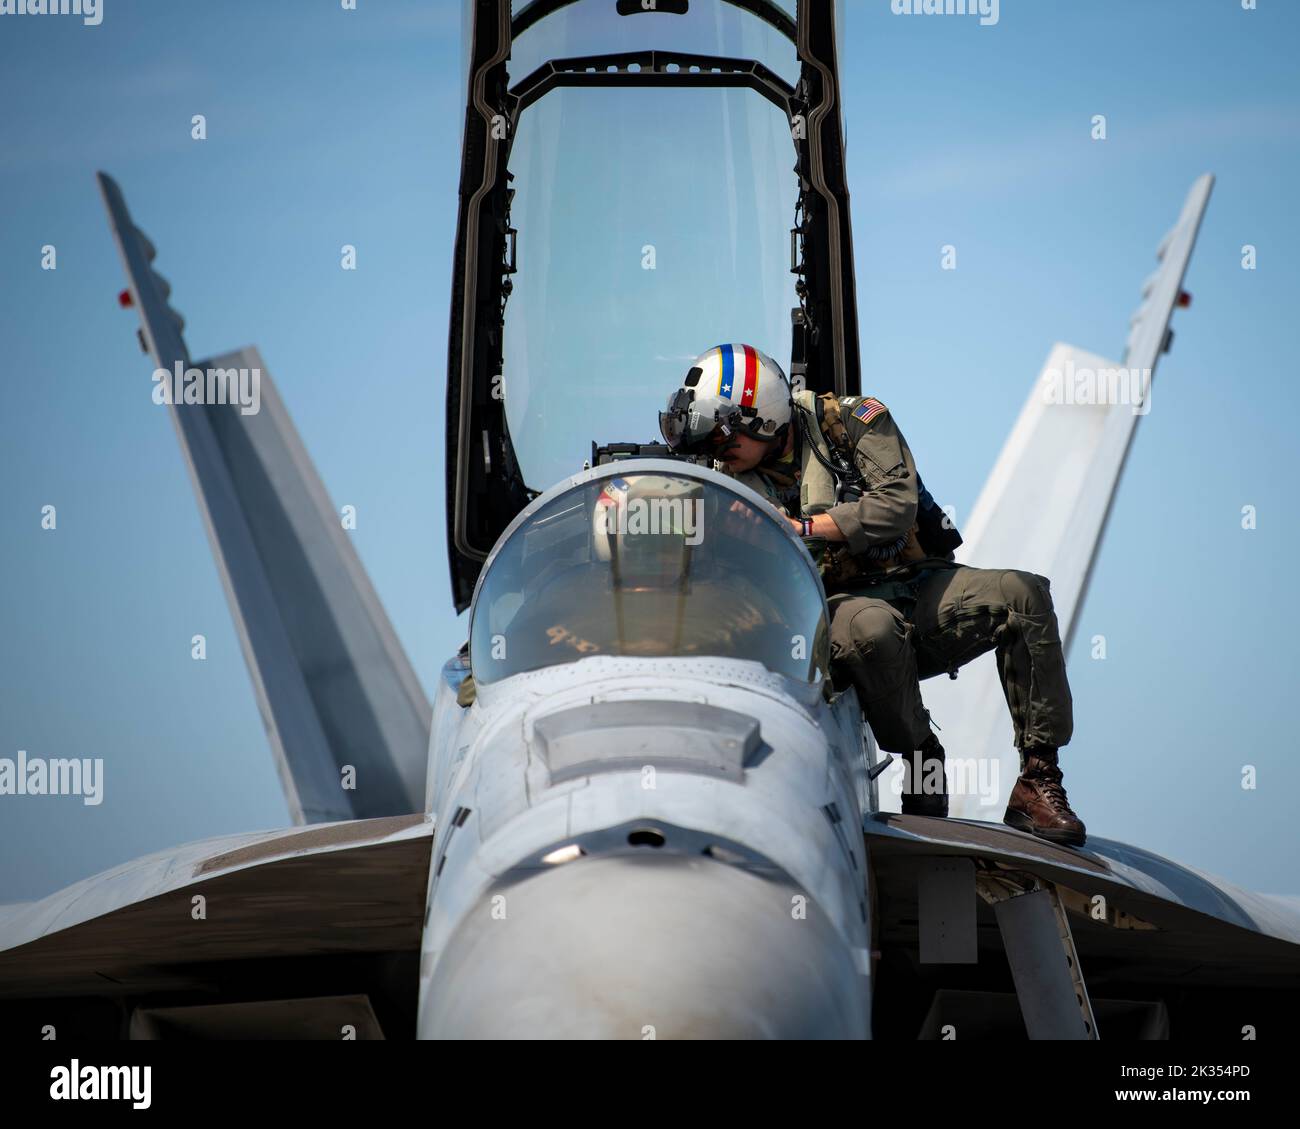 A U.S. Navy pilot with the Strike Fighter Squadron (VFA) 2, Naval Air Station Lemoore, California, exits a F/A-18 Super Hornet during Weapons System Evaluation Program-East 22.12 at Tyndall Air Force Base, Florida, Sept. 12, 2022. WSEP-E 22.12 is a formal, two-week evaluation exercise designed to test a squadron’s capabilities to conduct live-fire weapons systems during air-to-air combat training missions. (U.S. Air Force photo by Senior Airman Jacob Dastas) Stock Photo